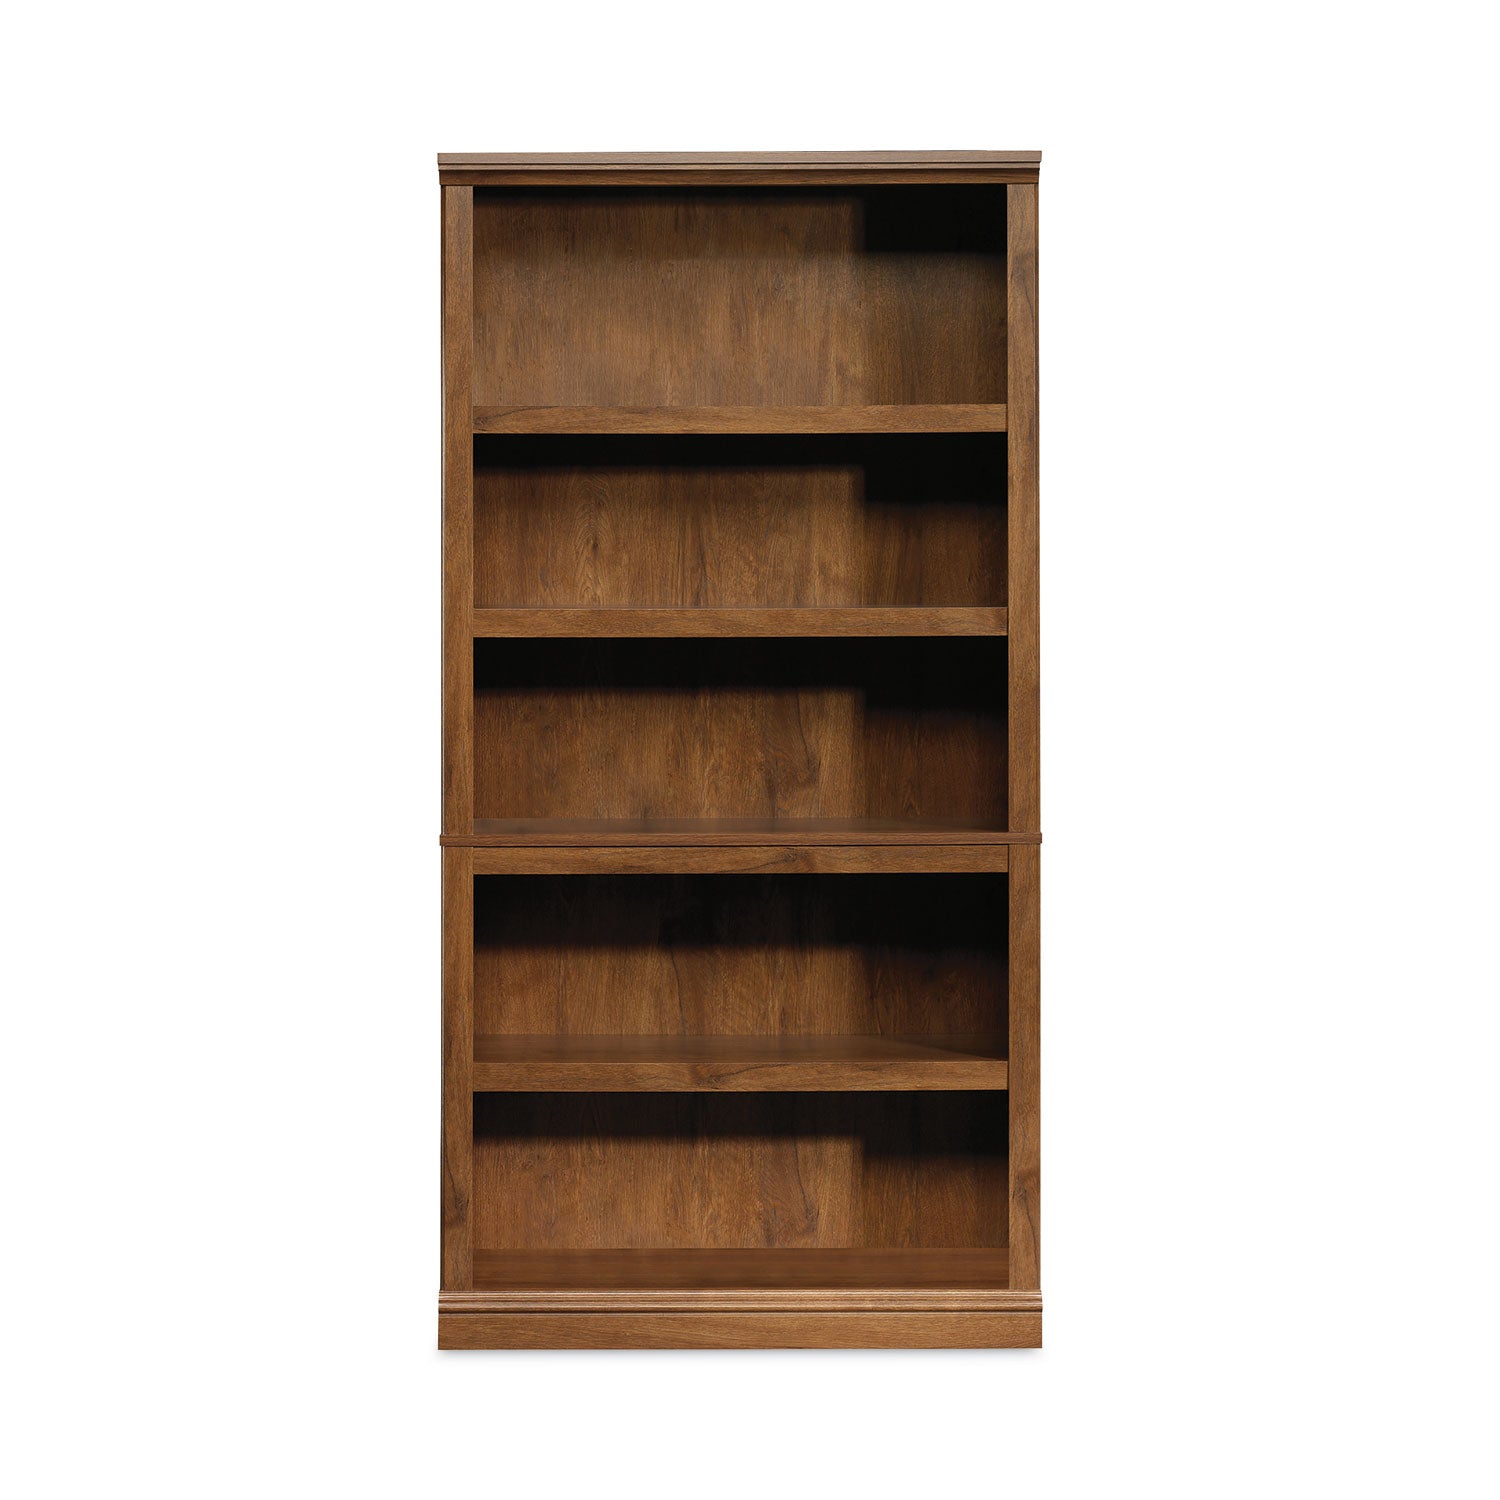 select-collection-bookcase-five-shelf-3527w-x-1322d-x-6976h-oiled-brown_swc410367 - 1